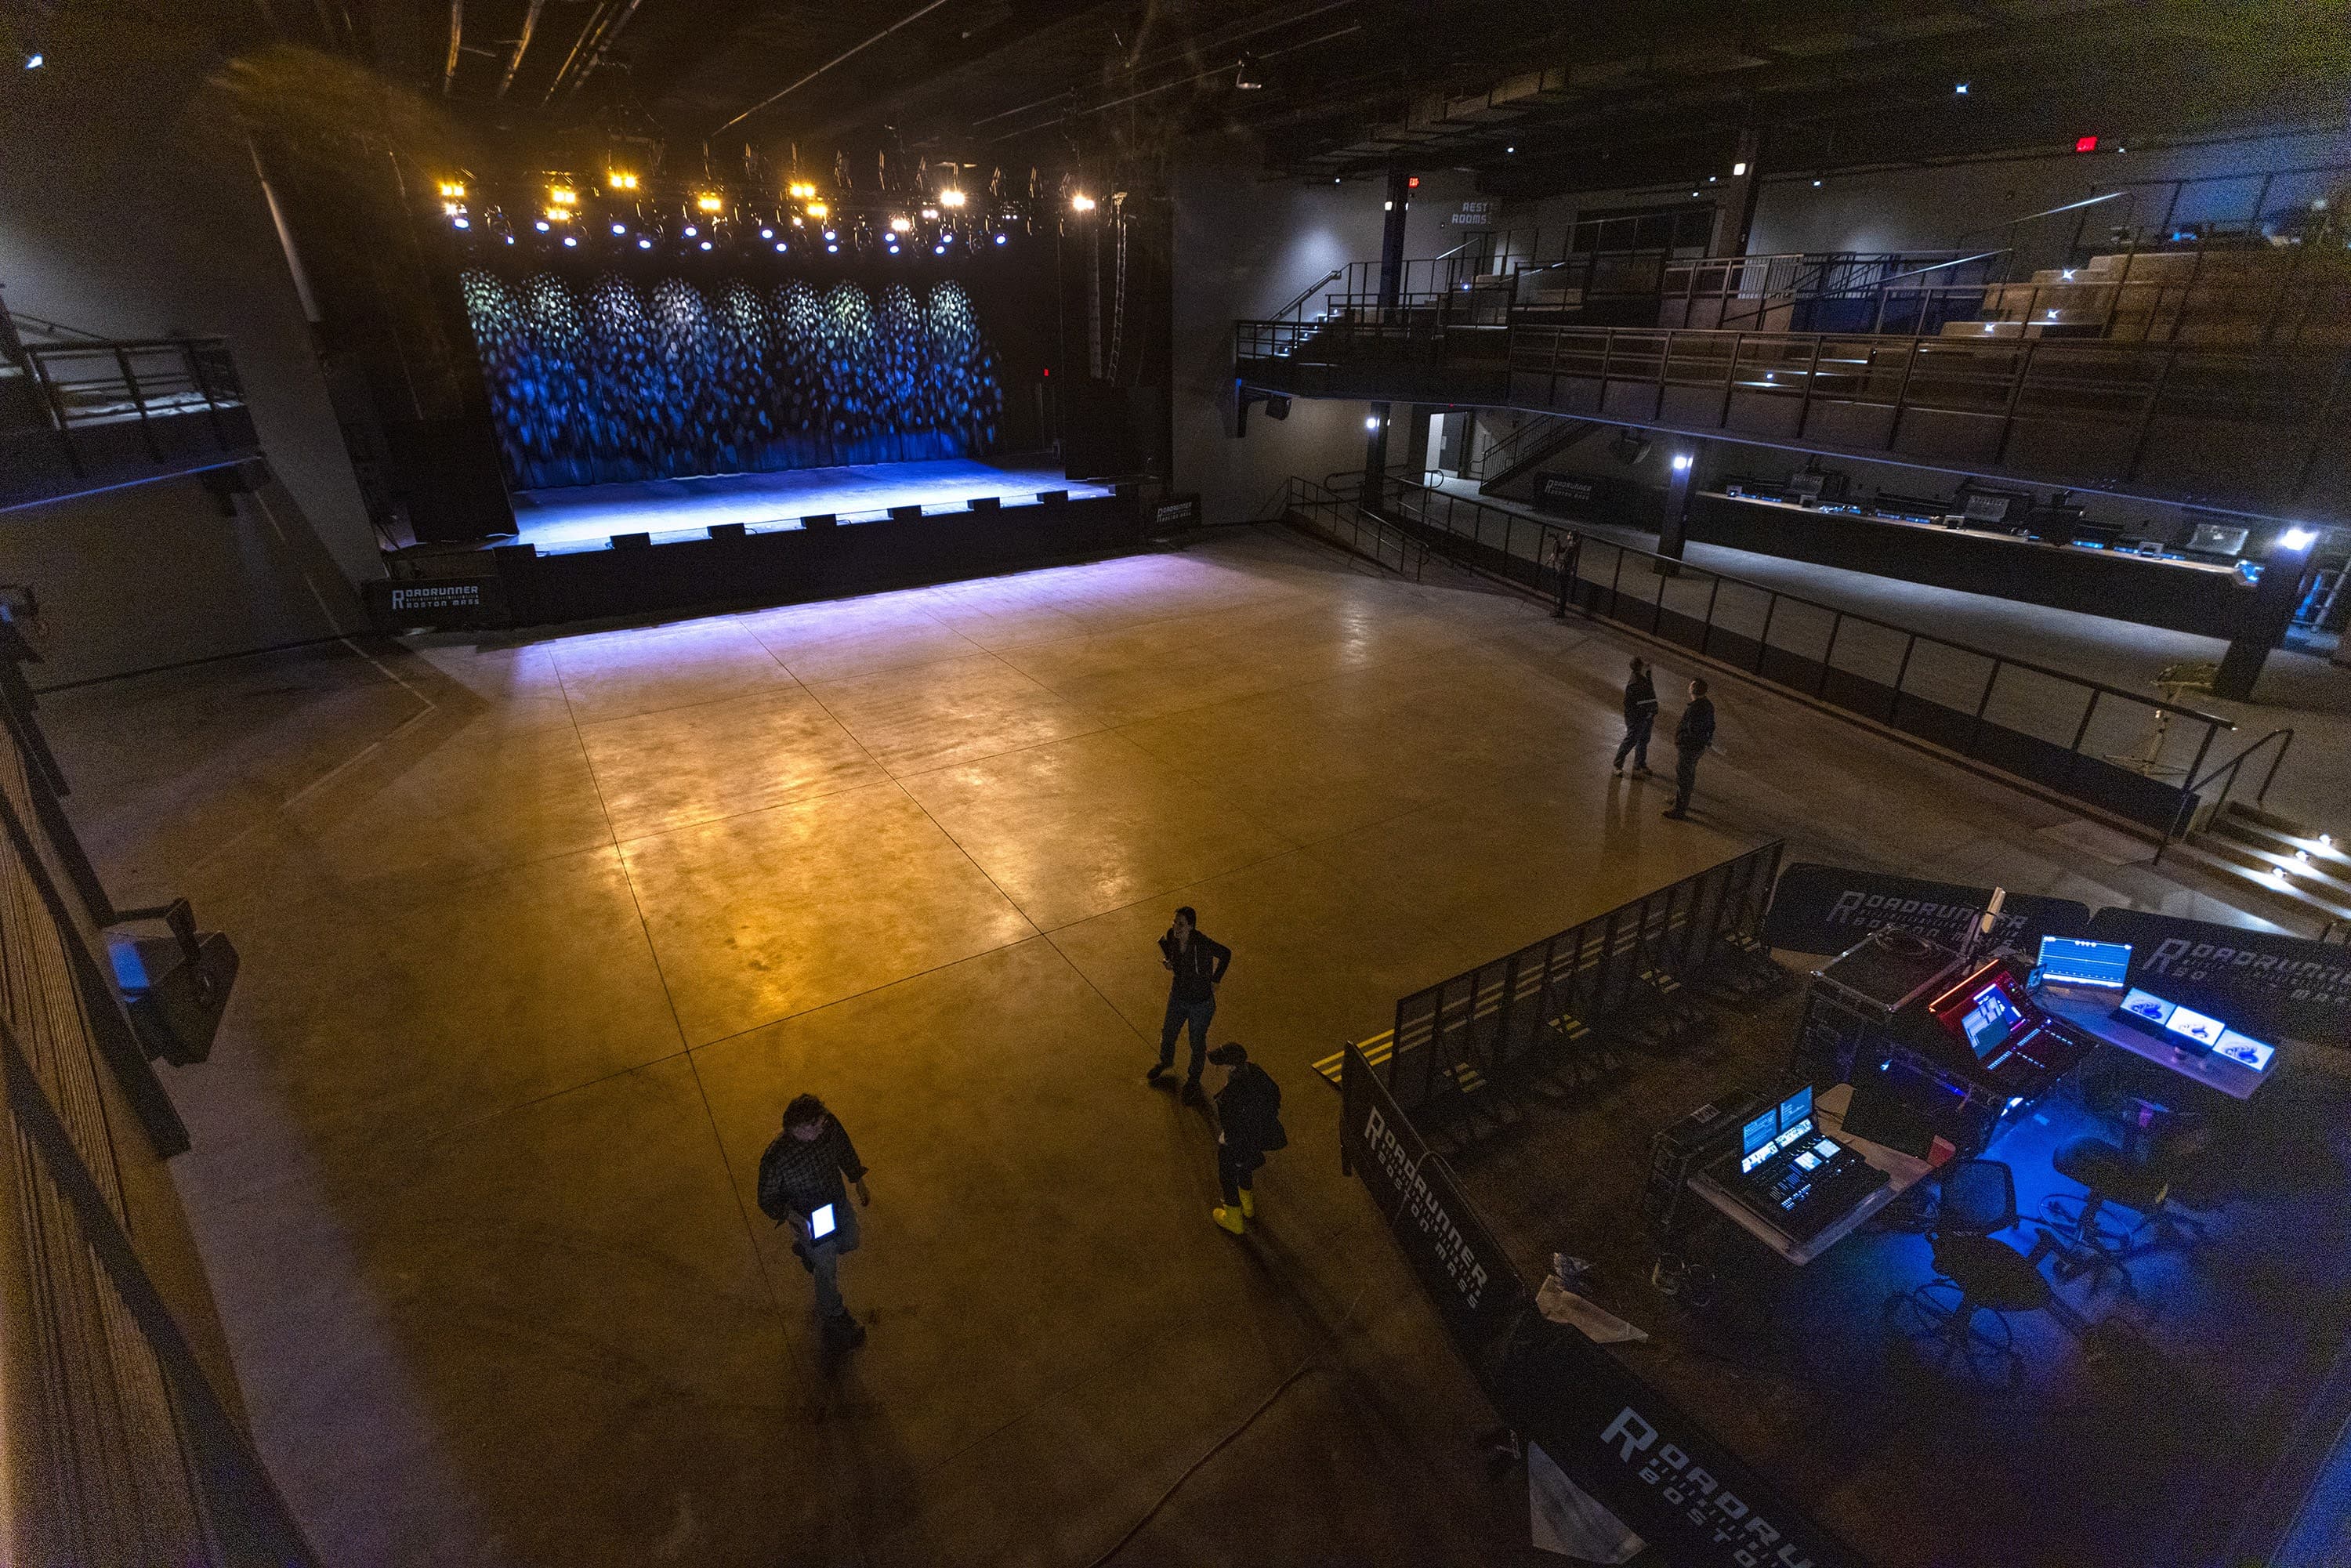 The view of the stage from the mezzanine level of Roadrunner. (Jesse Costa/WBUR)